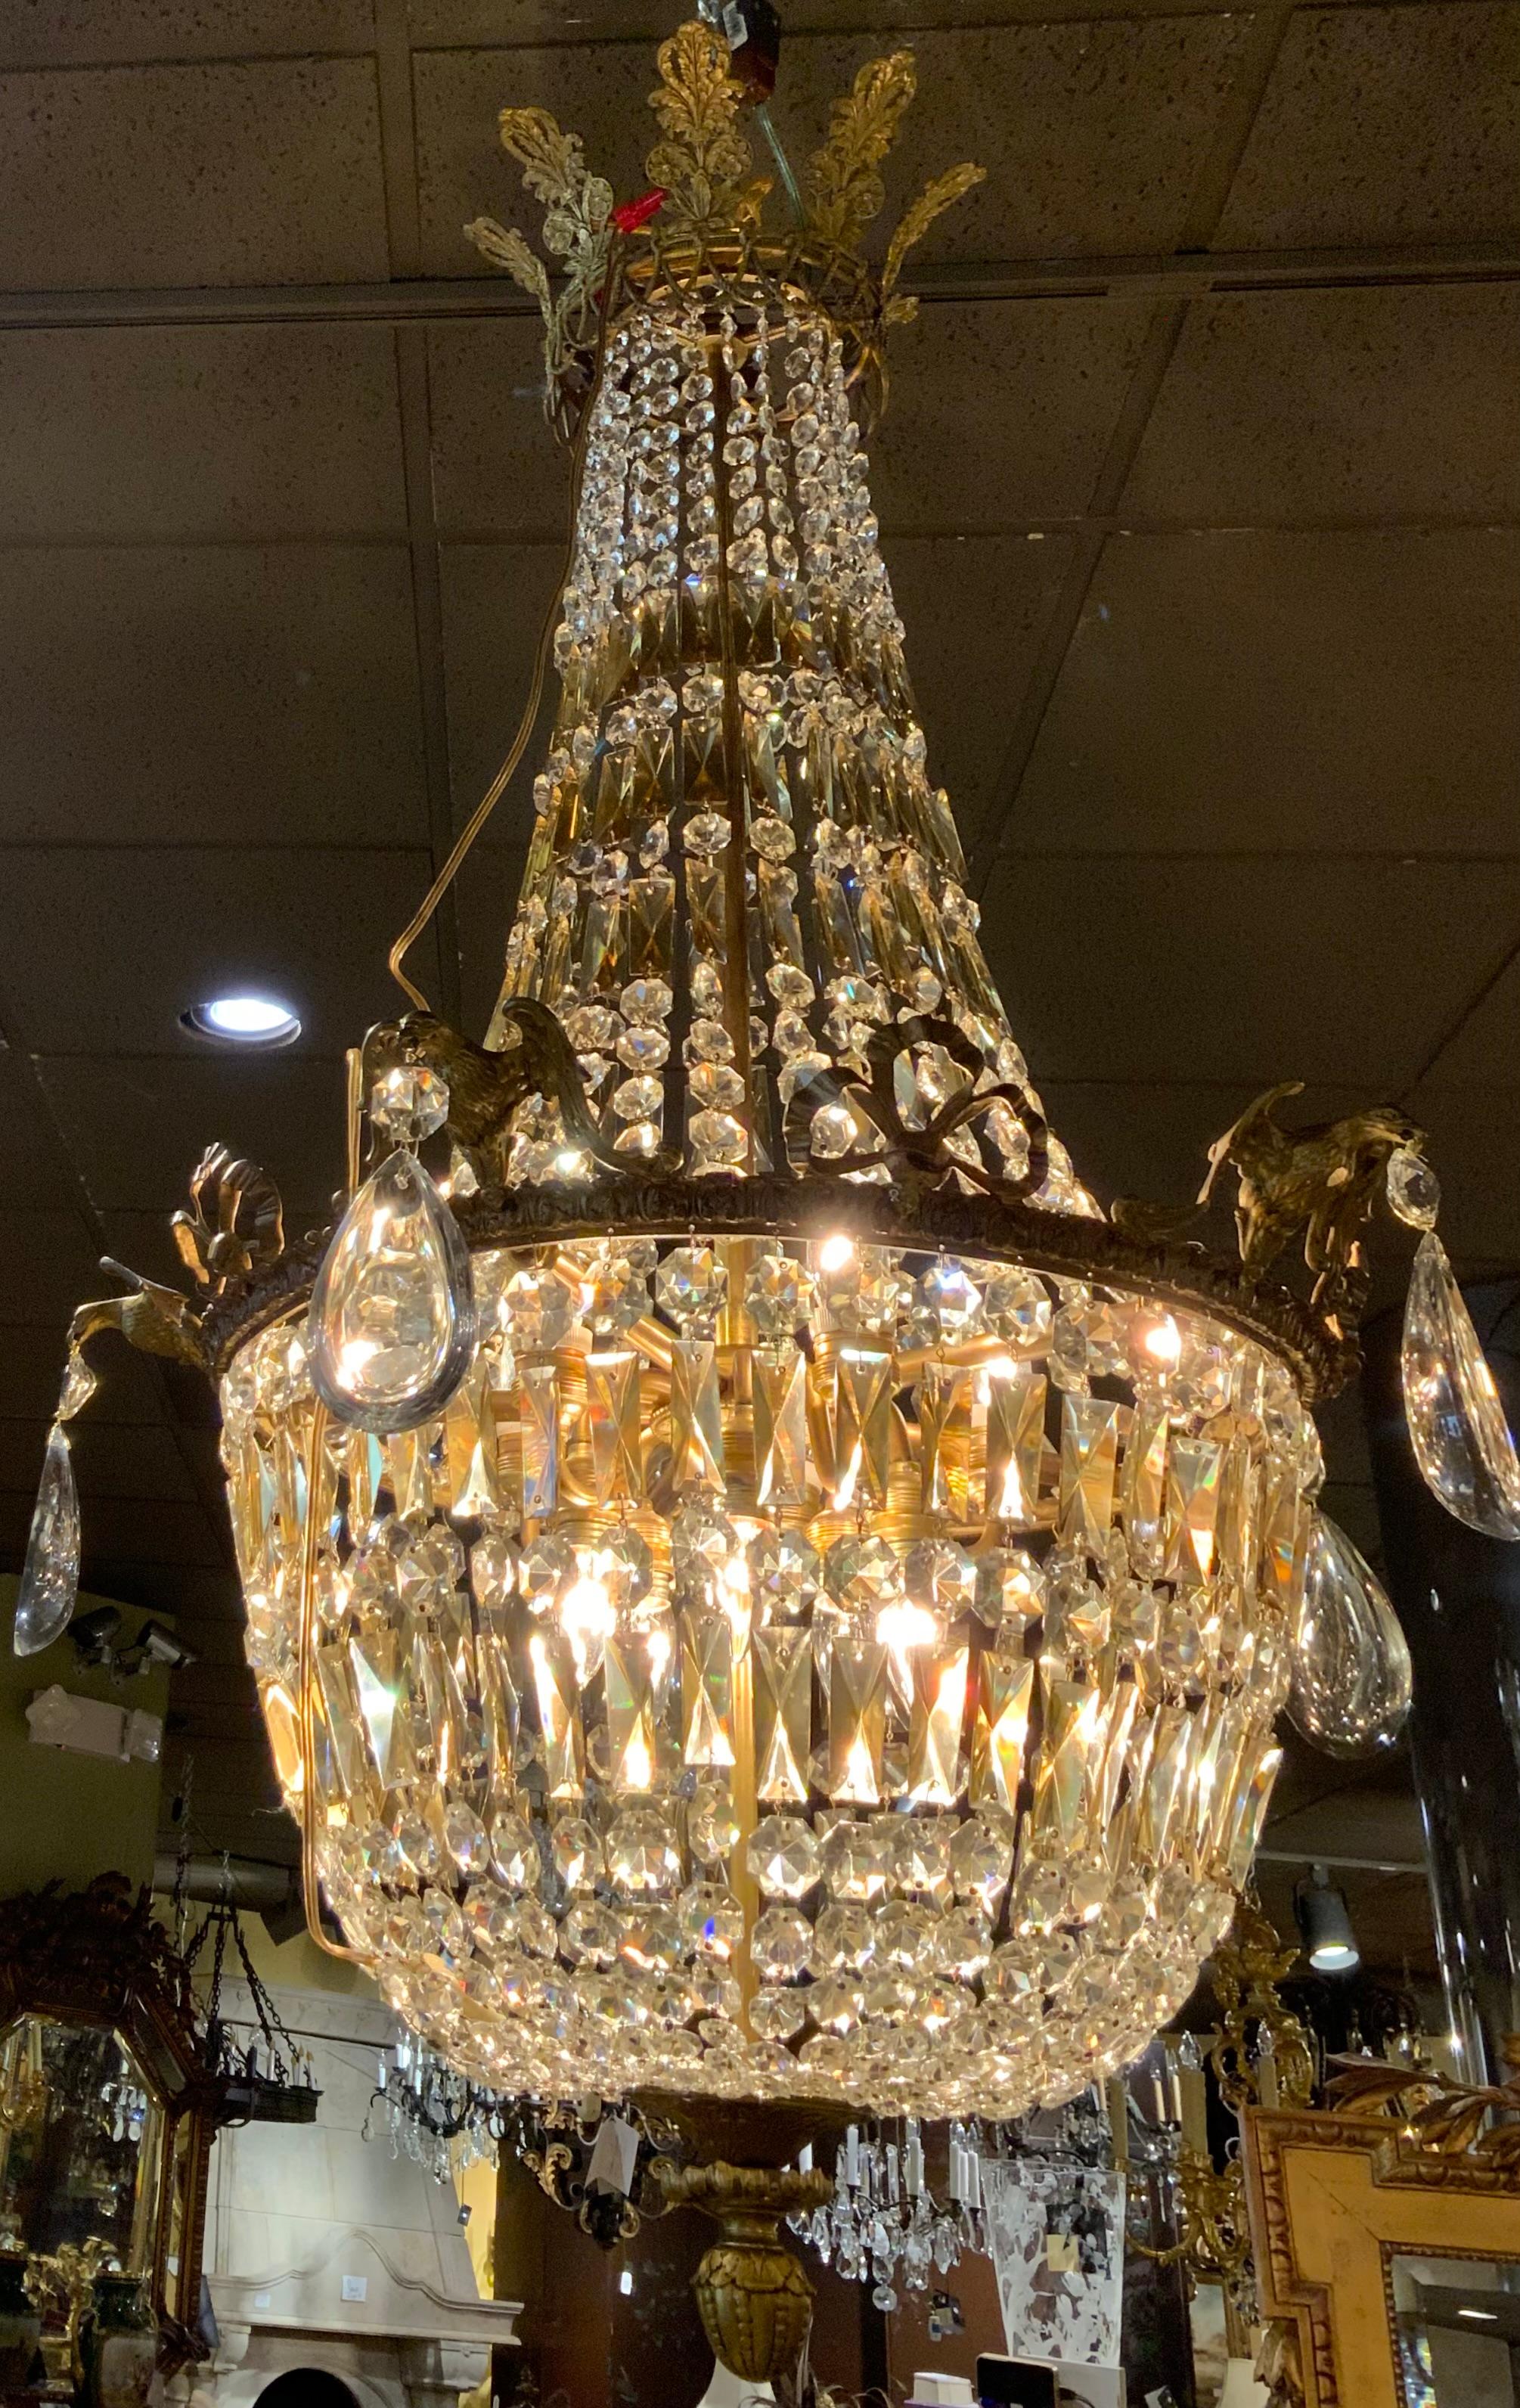 Large and impressive chandelier with both clear and
Amber color crystal. The Top piece is in the shape of a crown.
The perimeter of the bowl has a rim of antique bronze
Which is decorated with eagles holding a large crystal.
In between the eagles